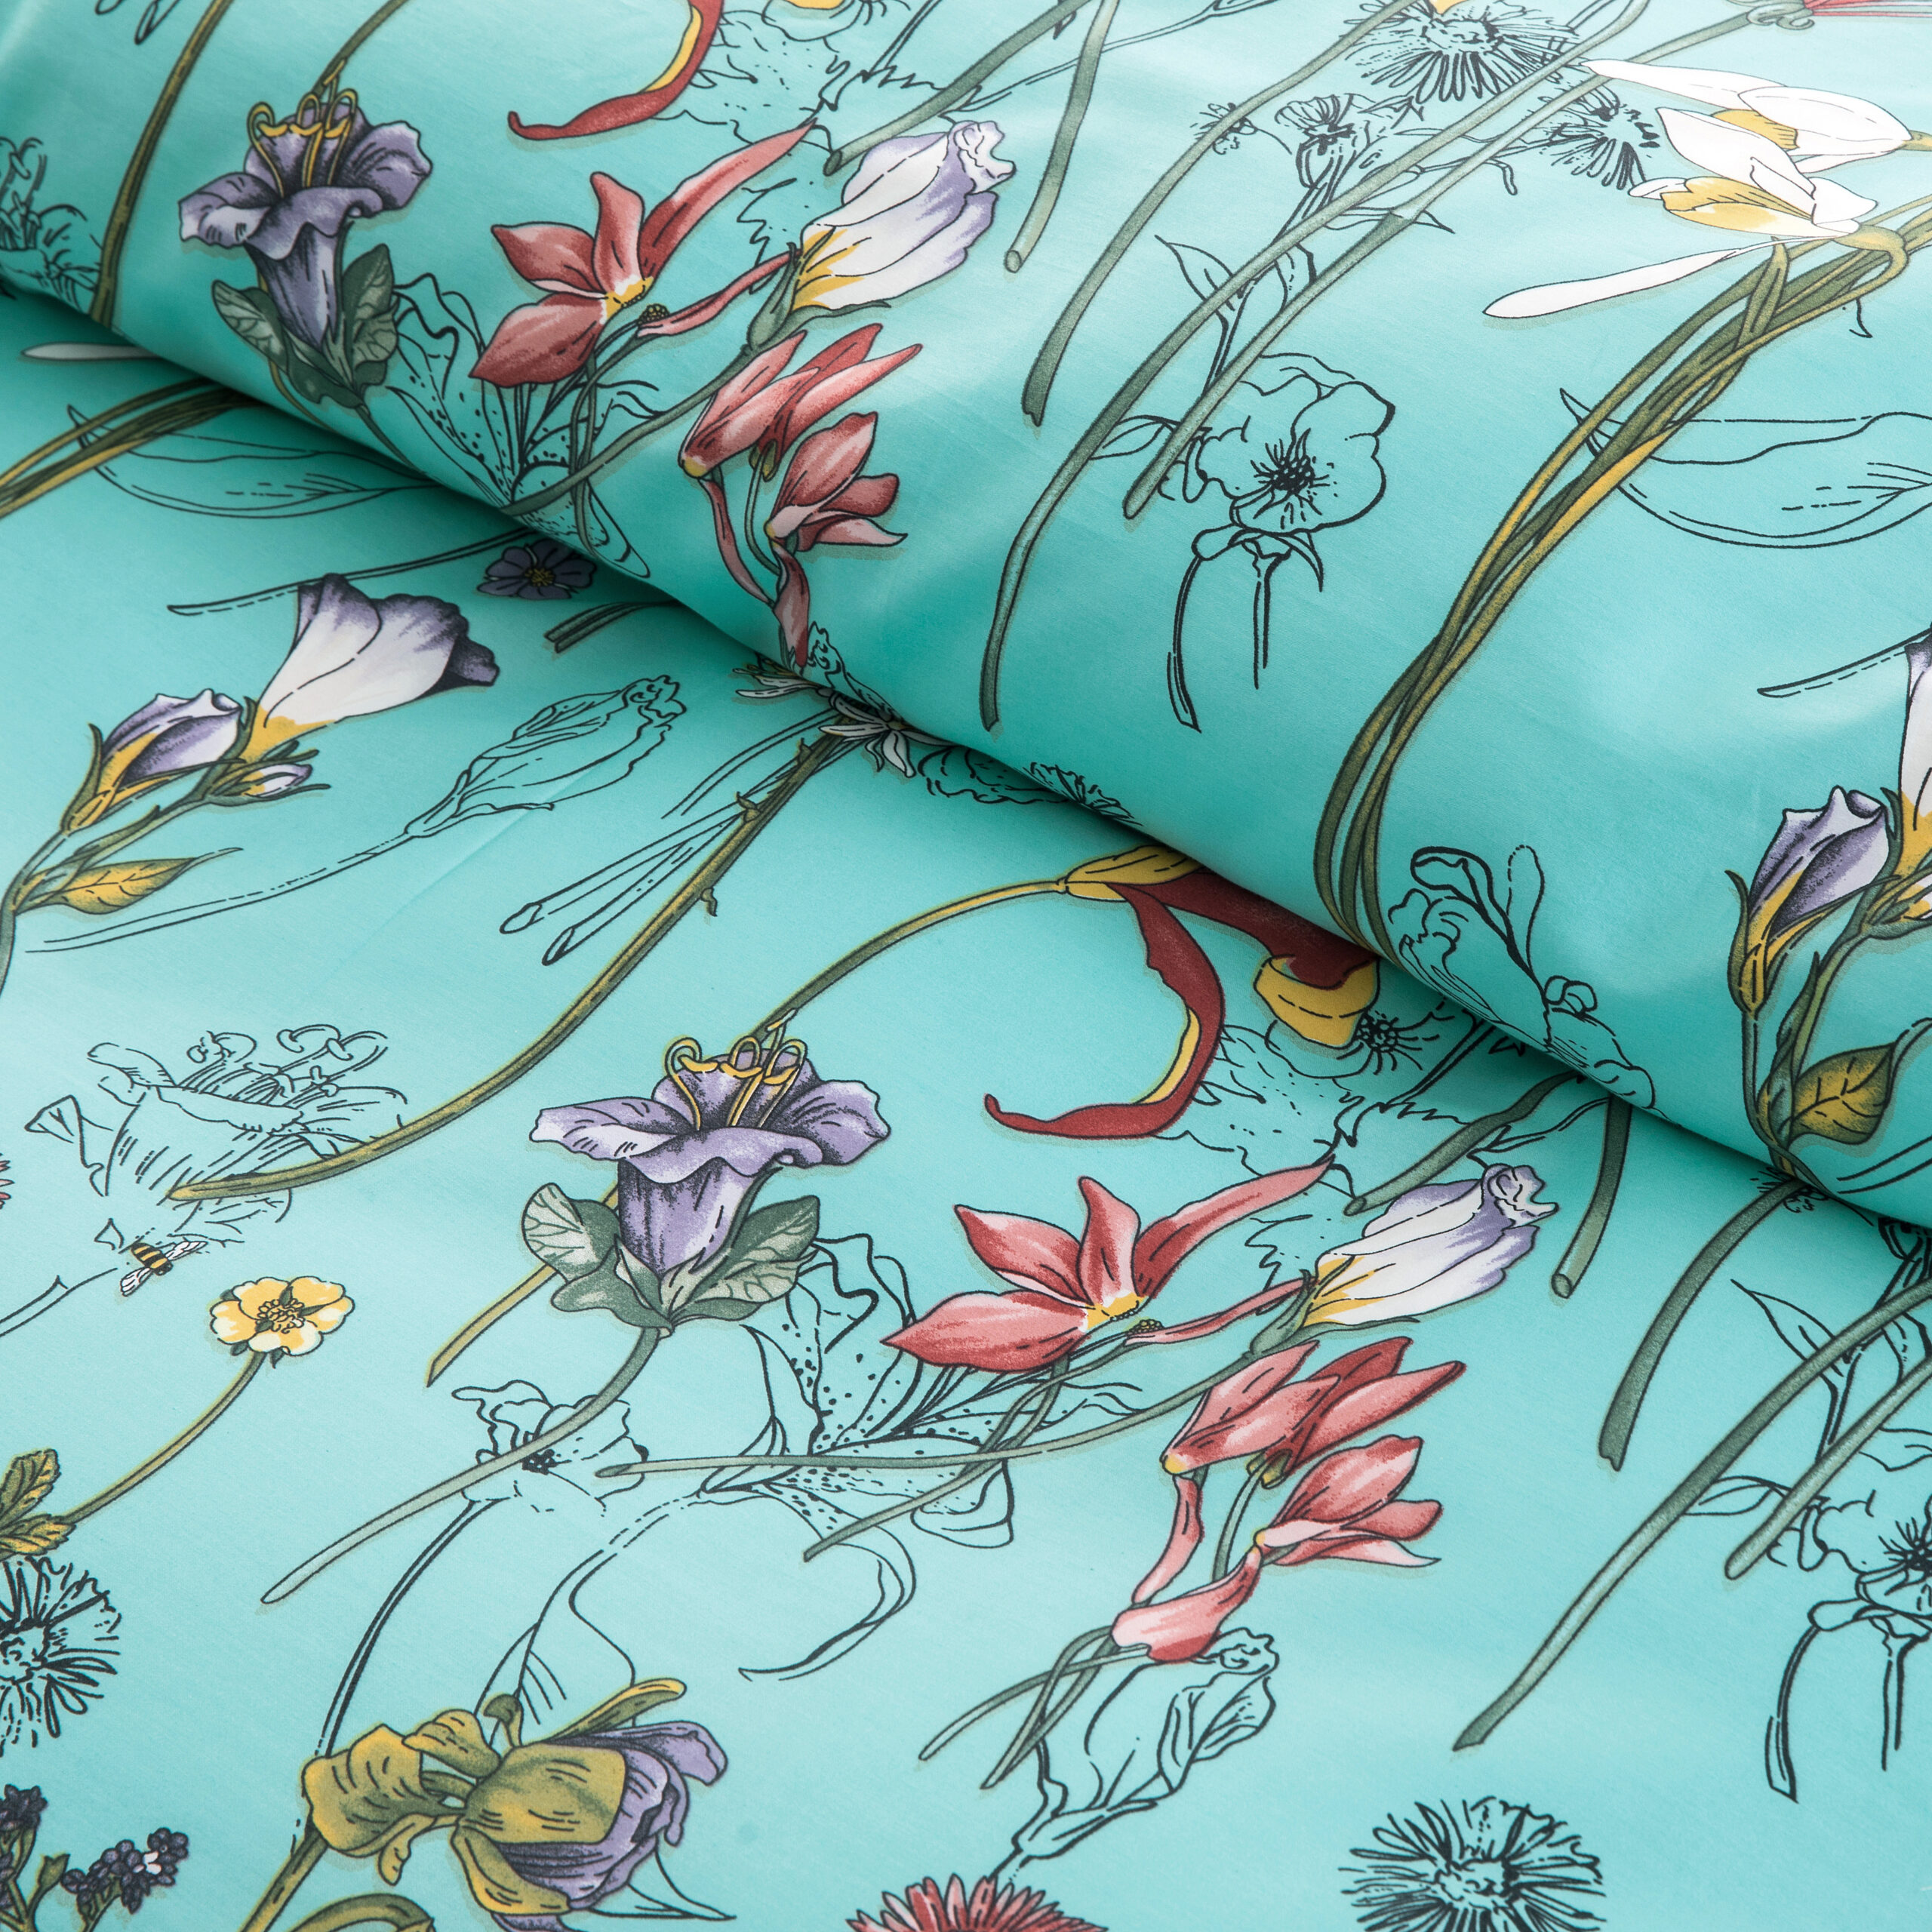 Floral Flowers Dragonfly Dragonflies 100% Cotton Sateen Sheet Set by Roostery 